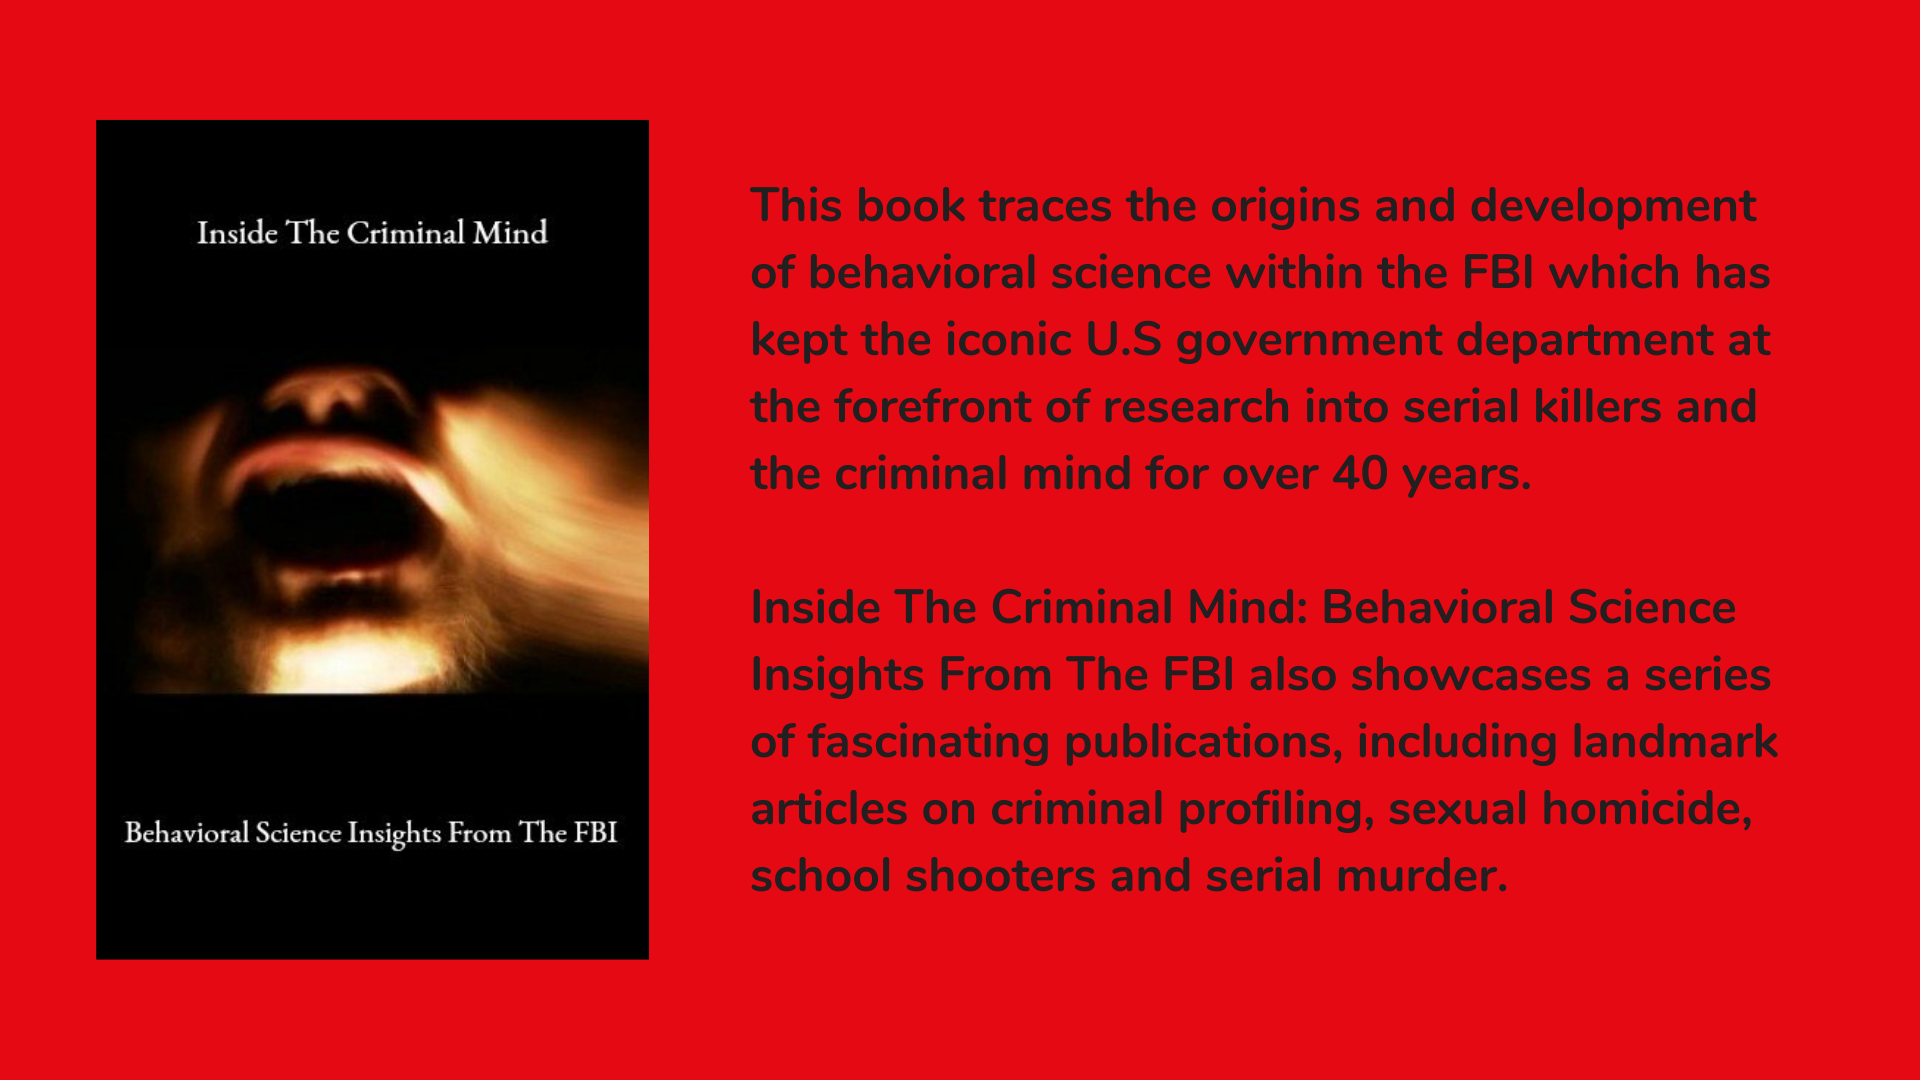 Inside The Criminal Mind: Behavioral Science Insights From The FBI: An Introductory Guide Book Cover and Description.